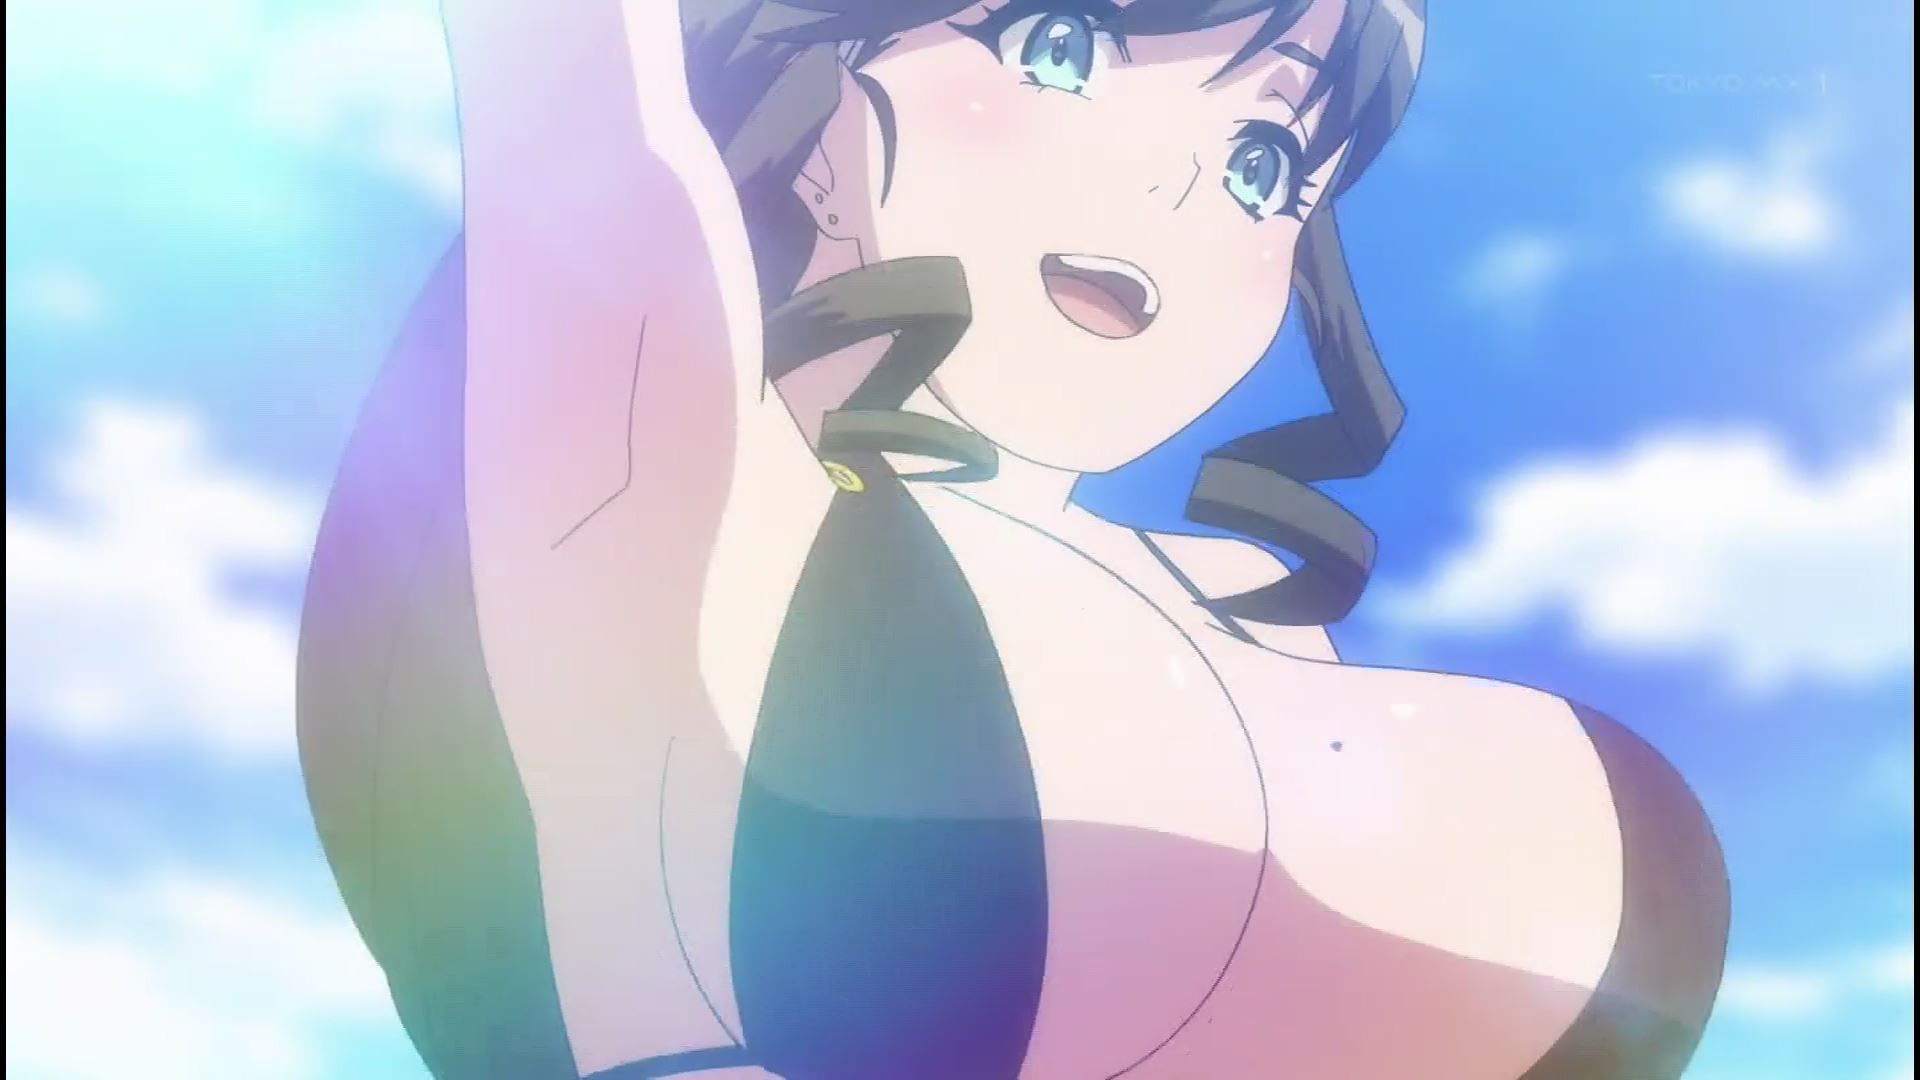 Anime [Kandagawa JETGIRLS] 6 episodes, such as girls' very cute swimsuit and naked! 14